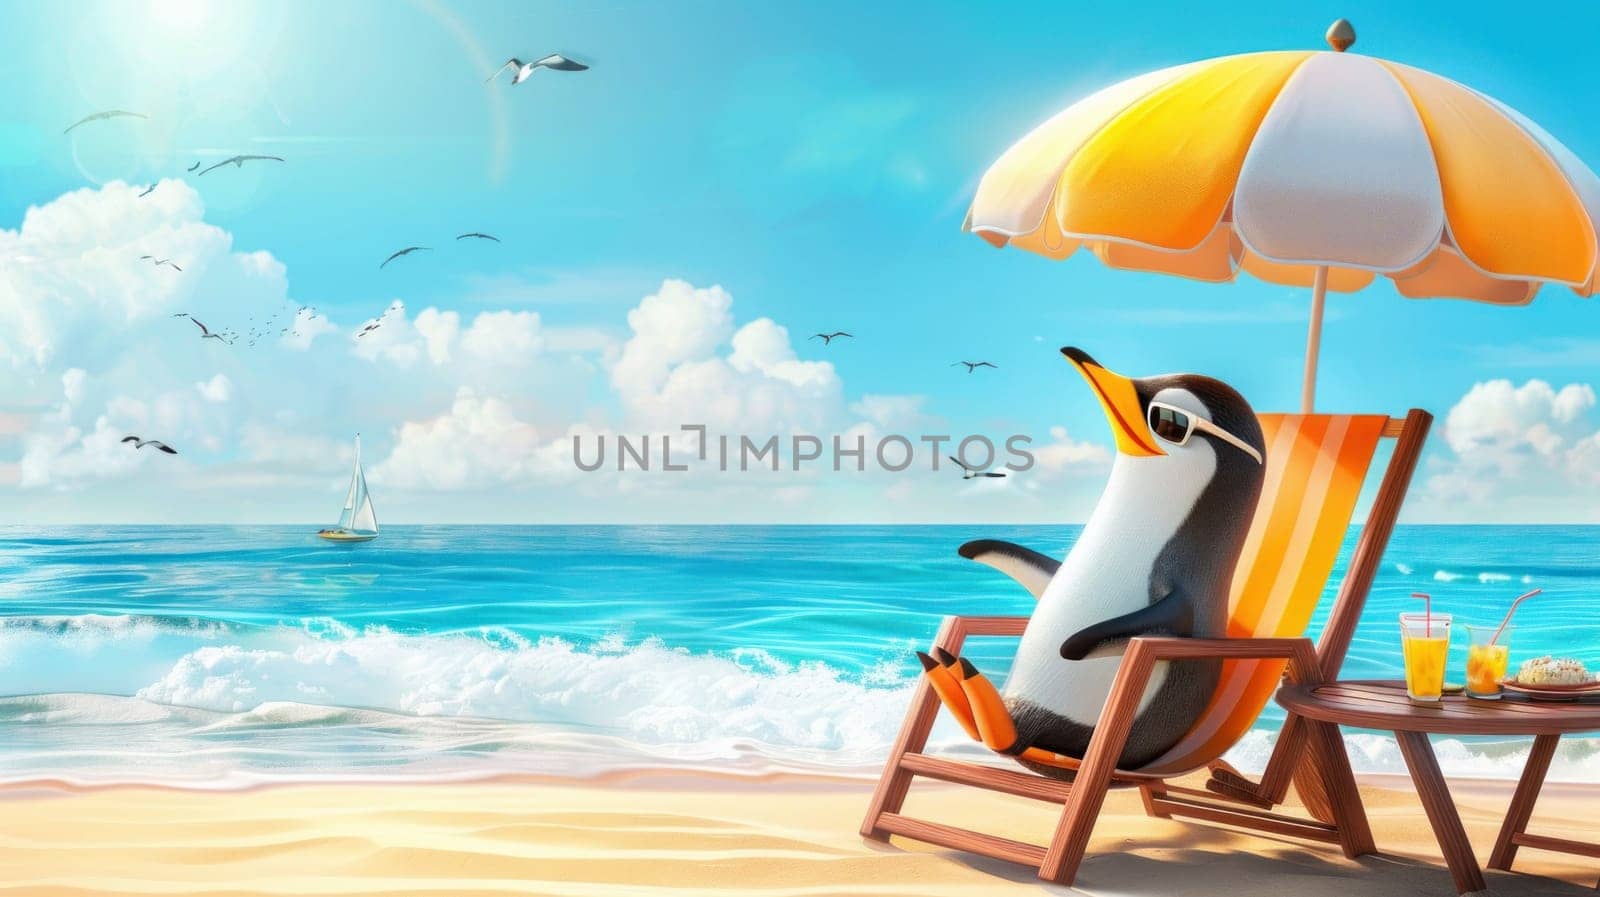 A cartoon penguin is sitting in a beach chair under an umbrella. The scene is bright and sunny, with a boat in the distance and several birds flying overhead